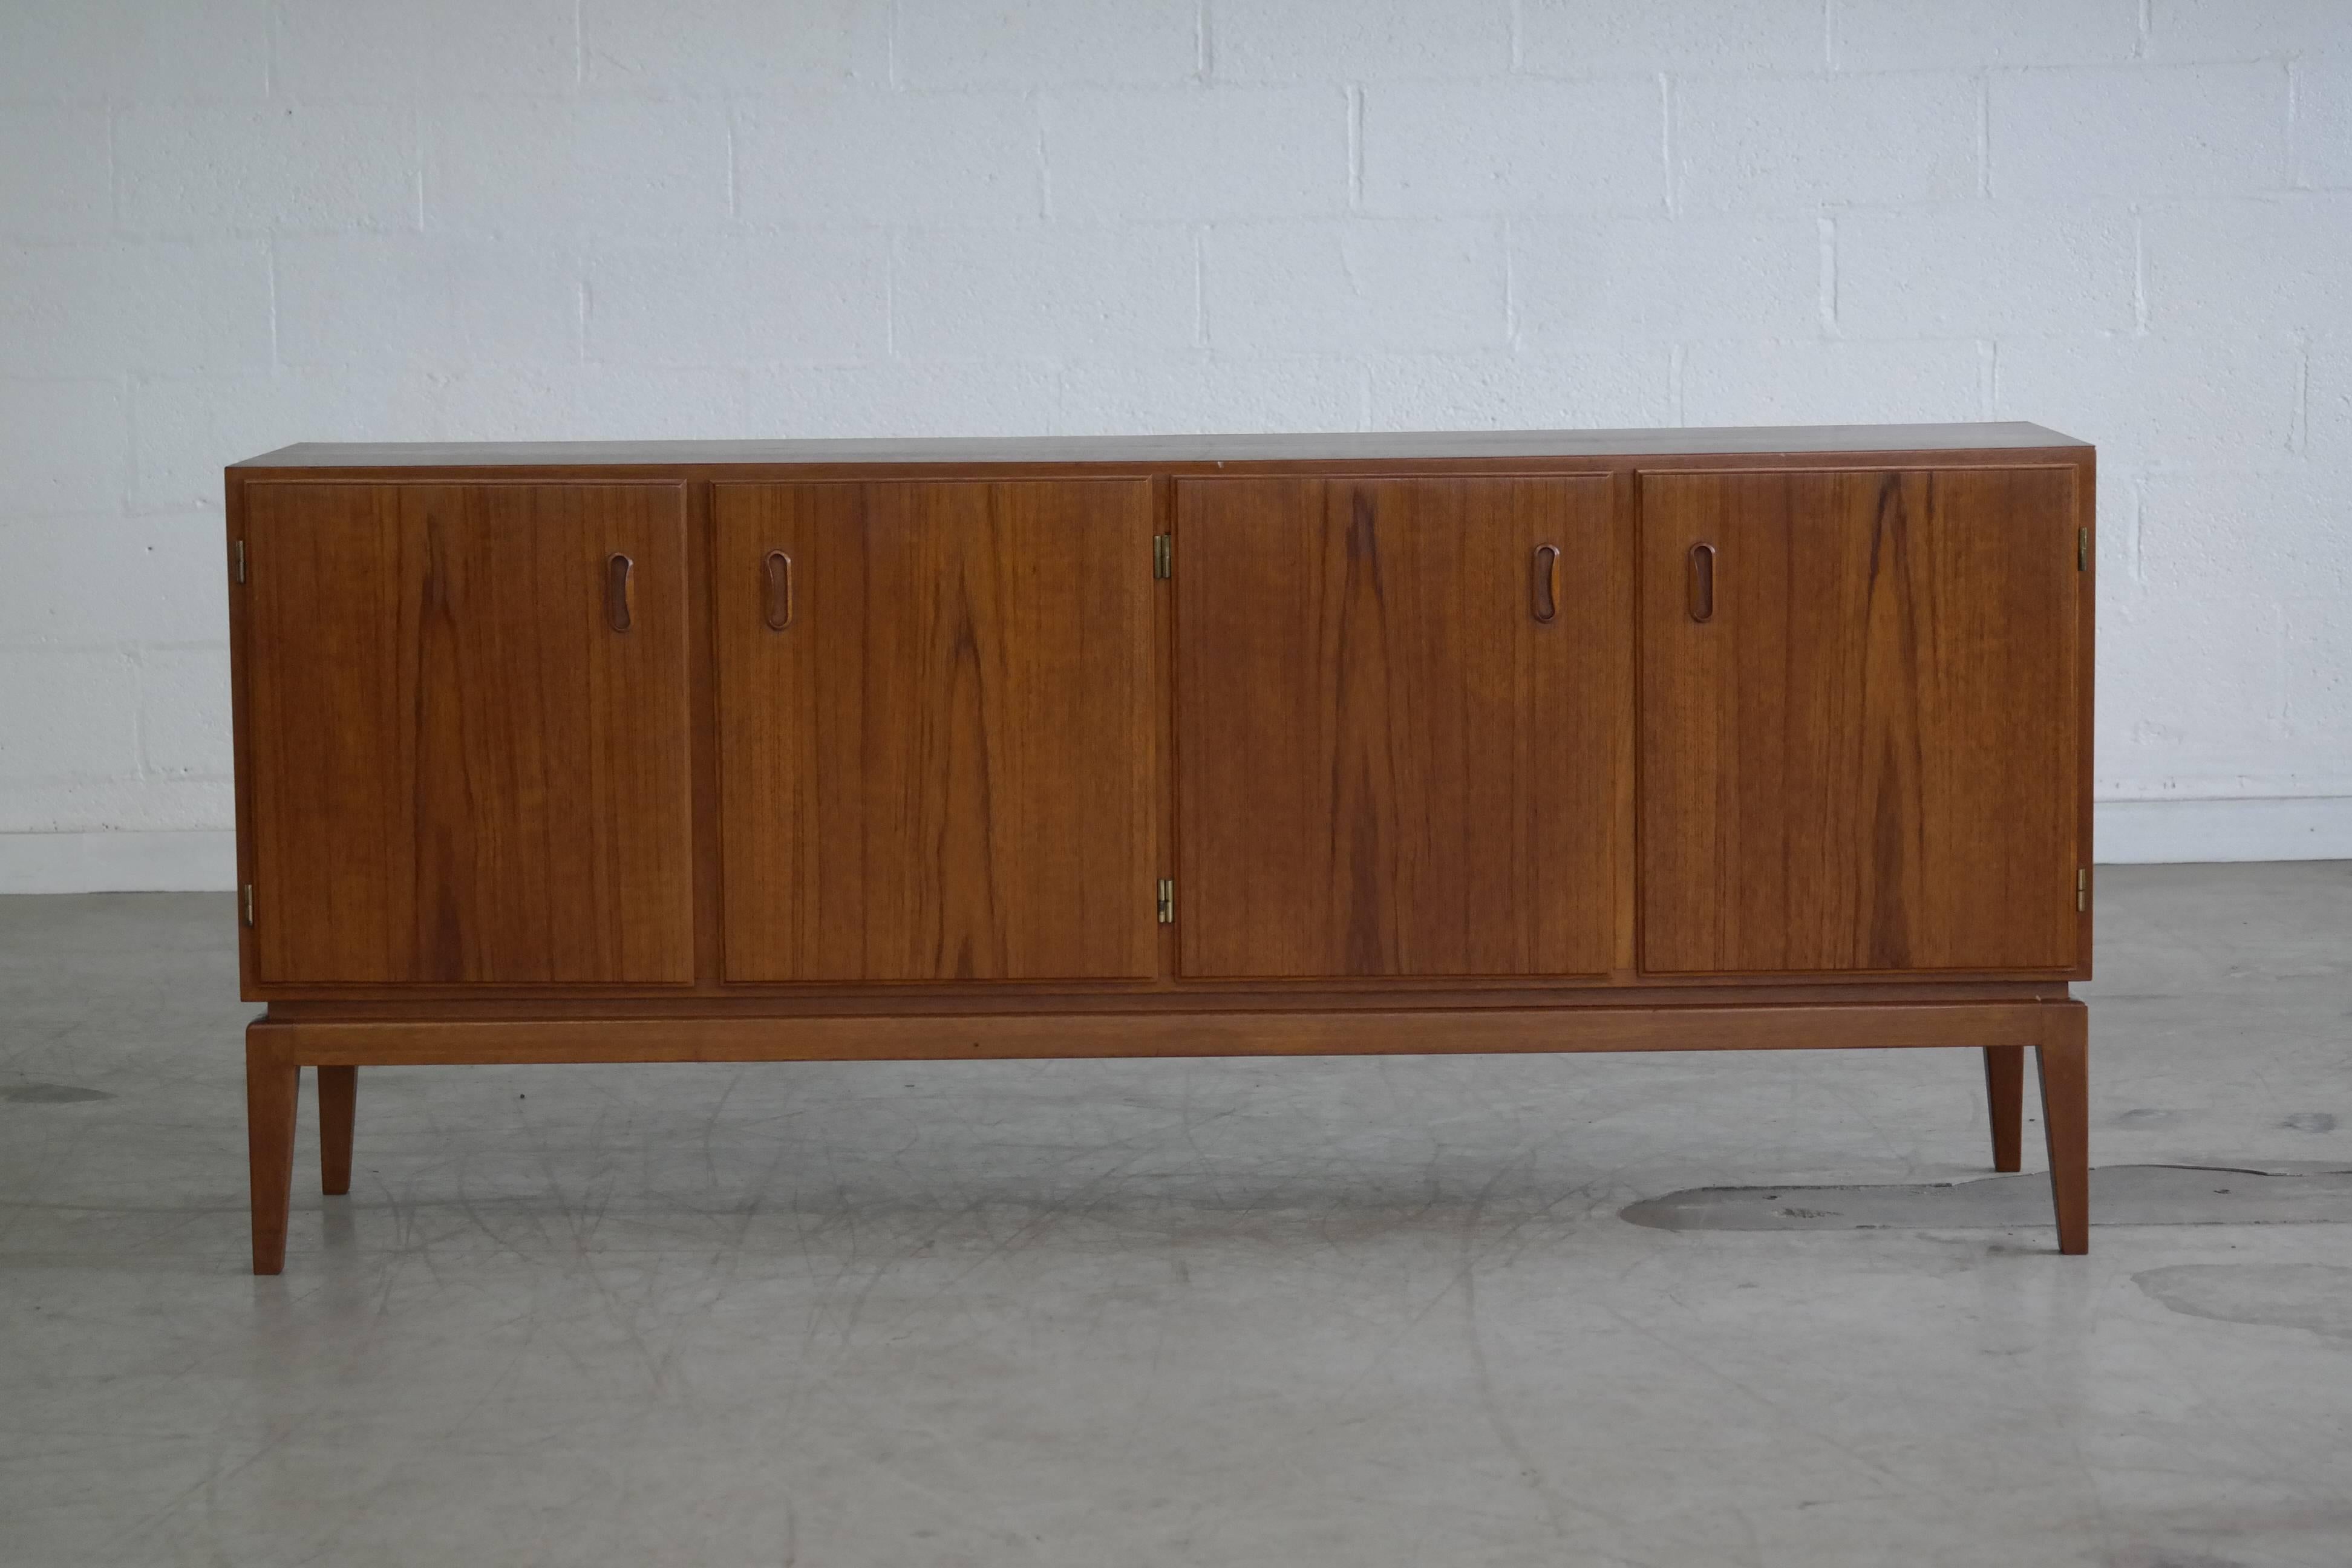 Beautifully proportioned low teak credenza with clean lines in excellent condition. Four compartments each with one adjustable shelf. Very nice grain figure and color.
 